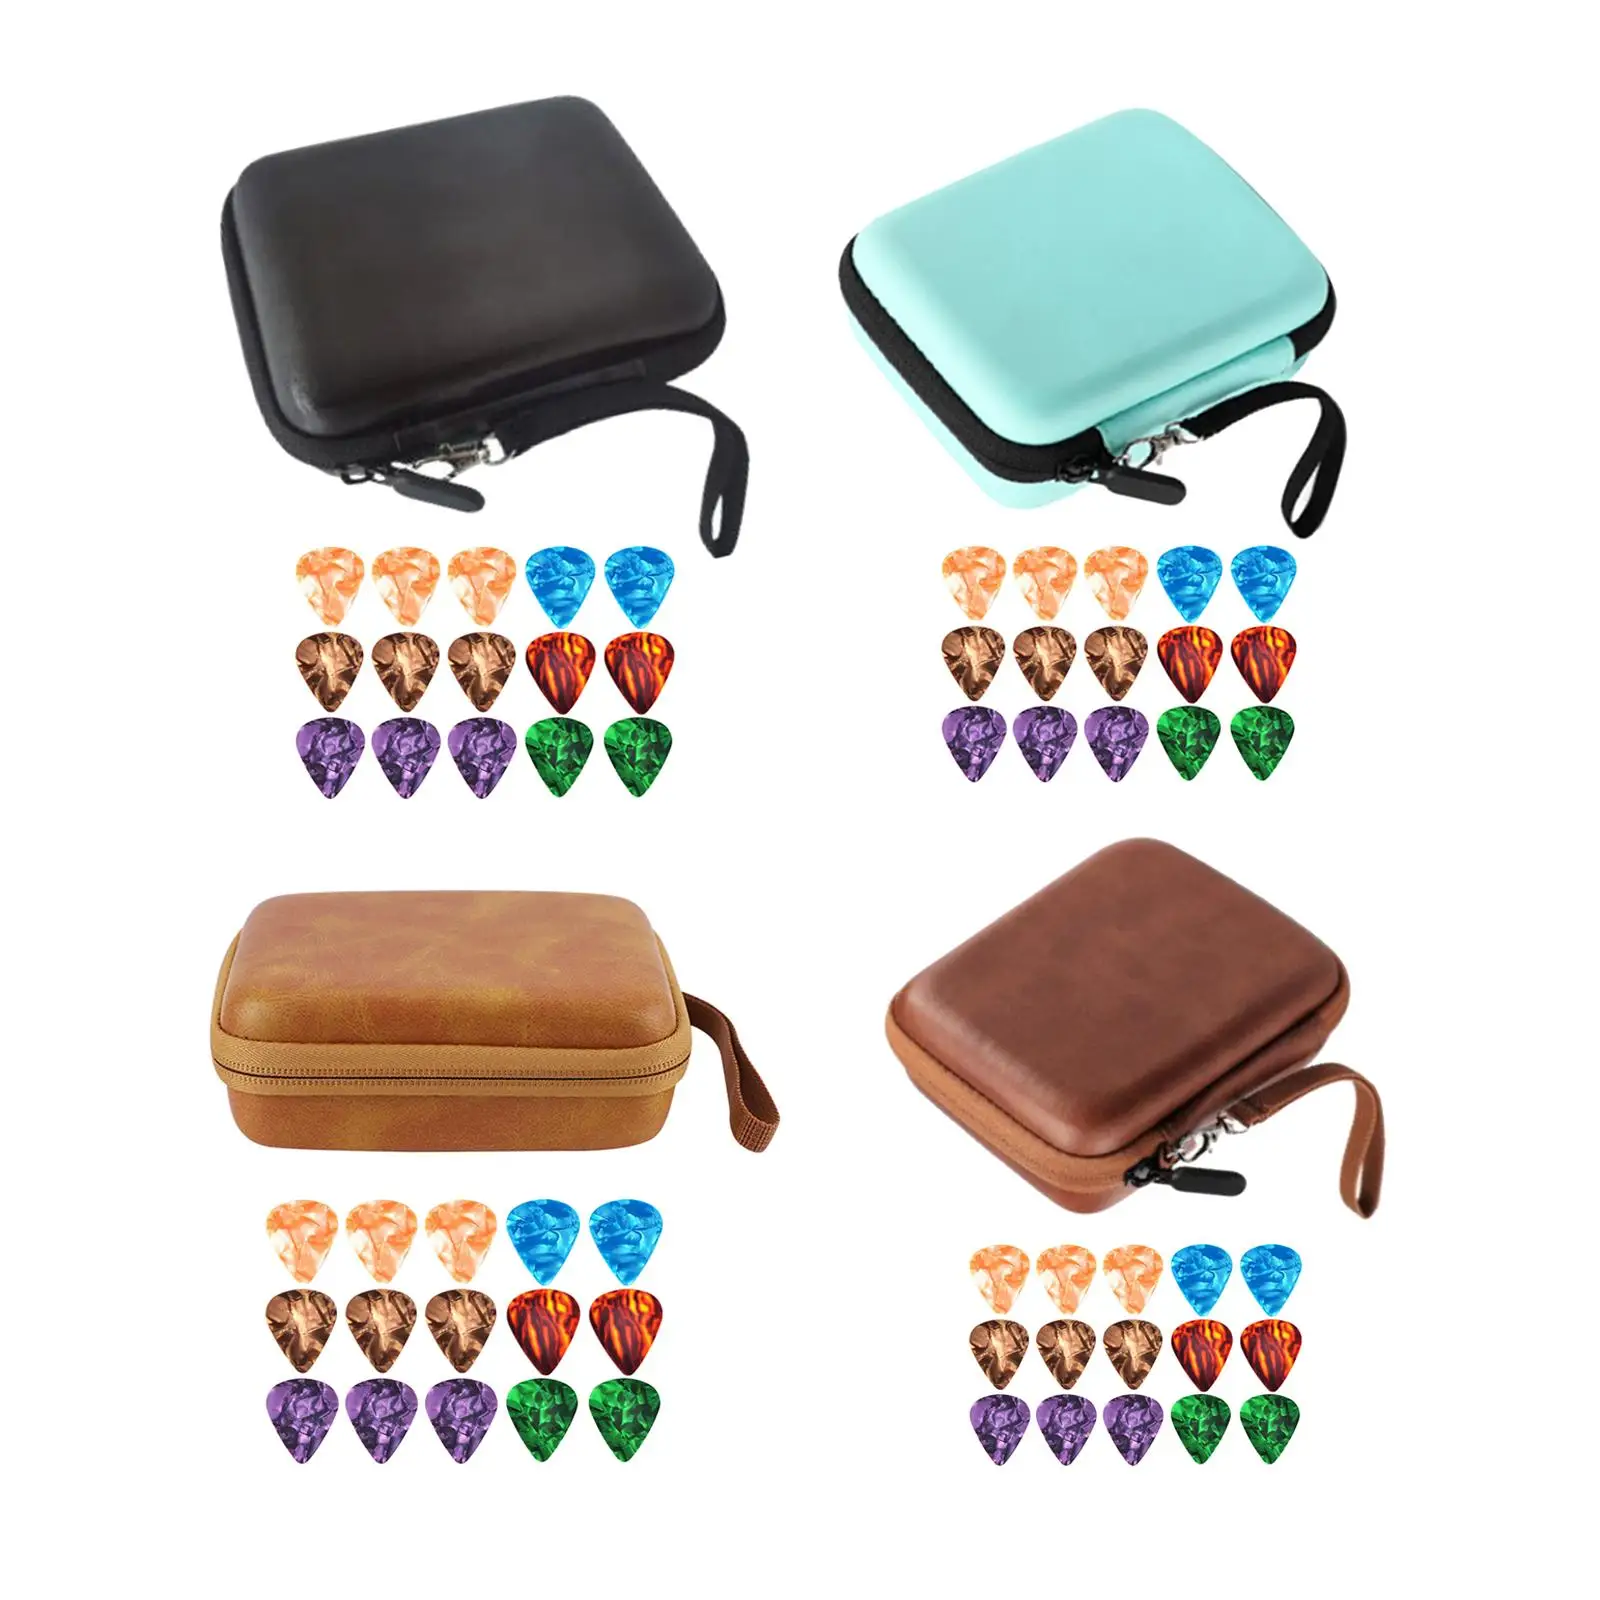 Leather Guitar Picks Holder Case Storage Pouch Box for Acoustic Strings